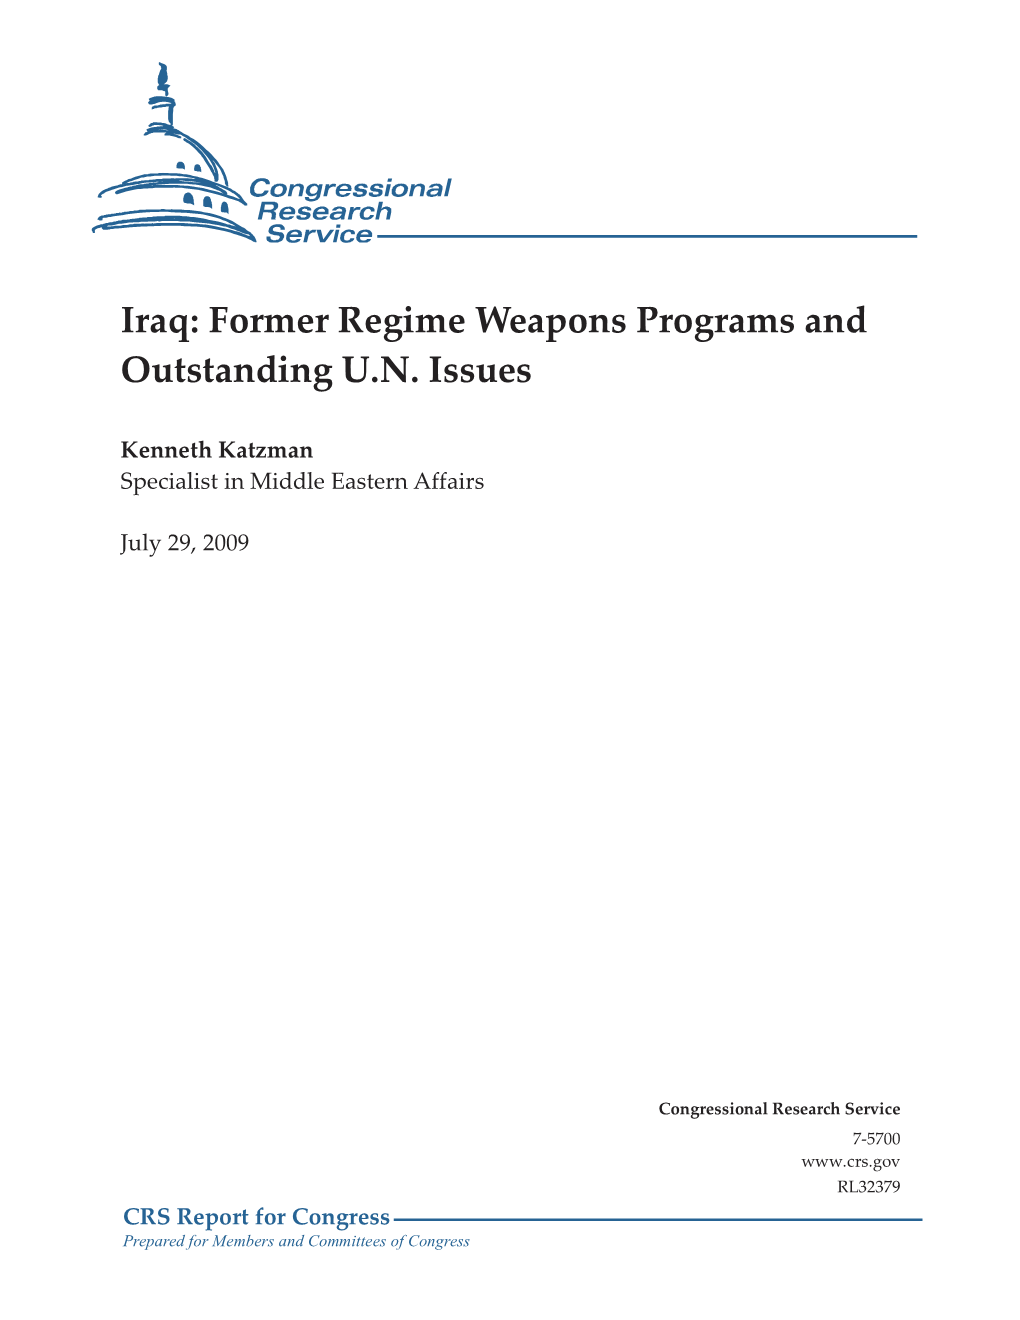 Iraq: Former Regime Weapons Programs and Outstanding U.N